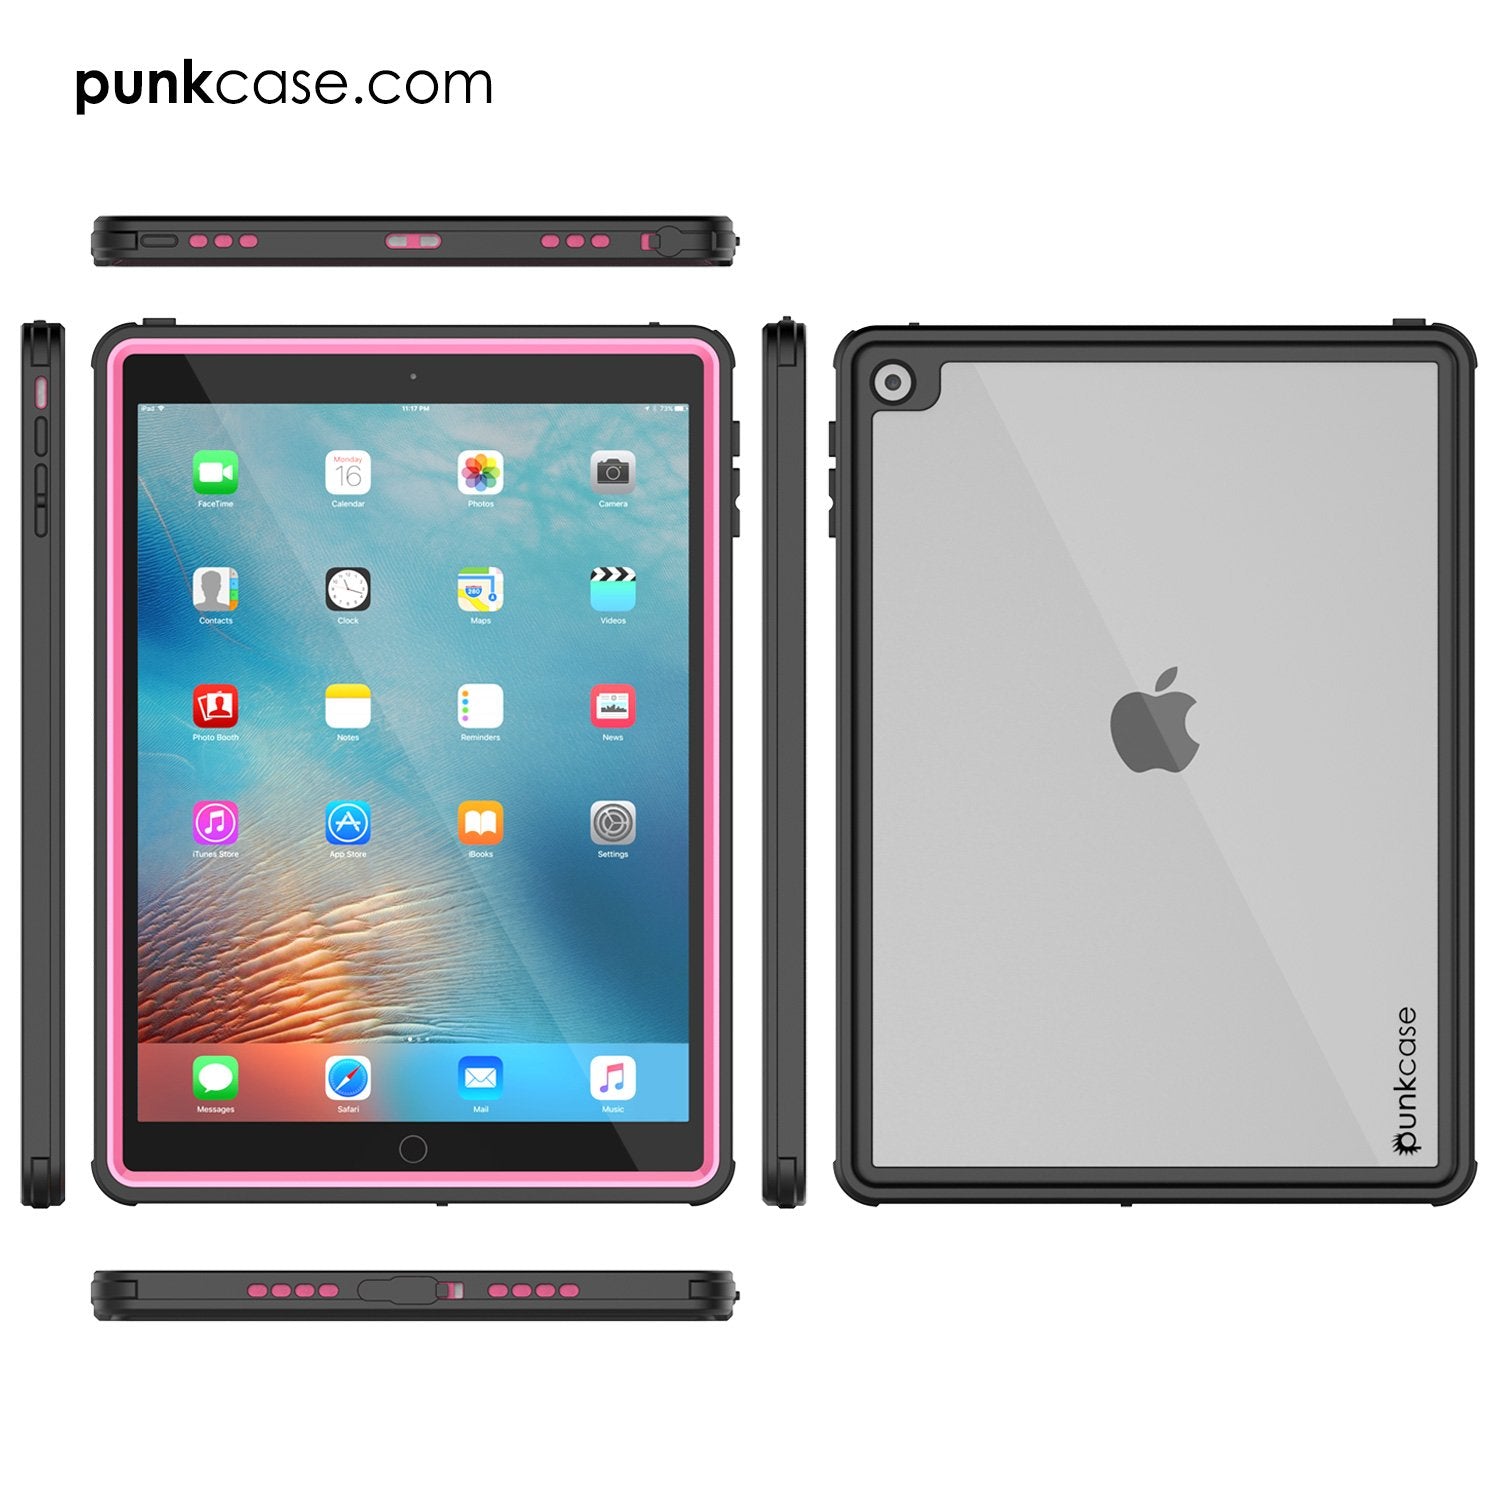 Punkcase iPad Pro 9.7 Case [CRYSTAL Series], Waterproof, Ultra-Thin Cover [Shockproof] [Dustproof] with Built-in Screen Protector [Pink]